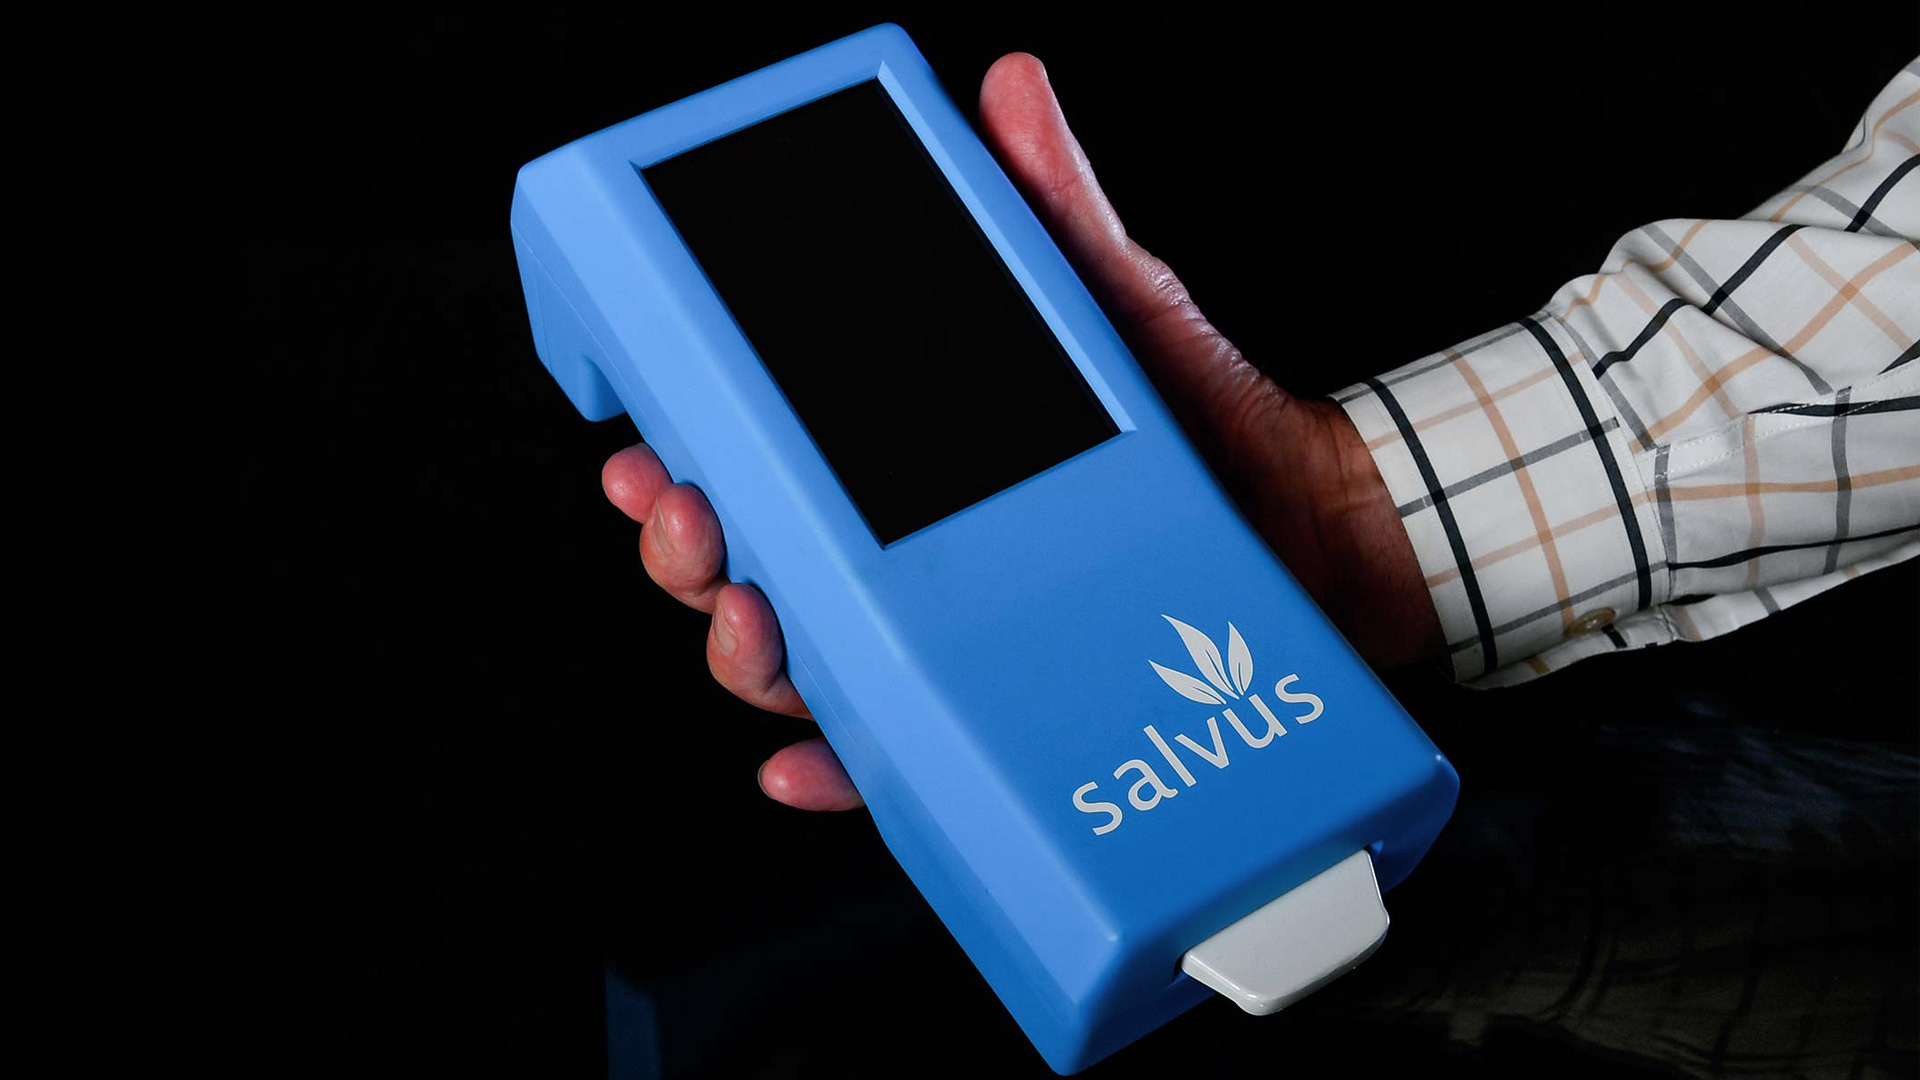 Hand holding rectangular blue plastic device with screen on front.